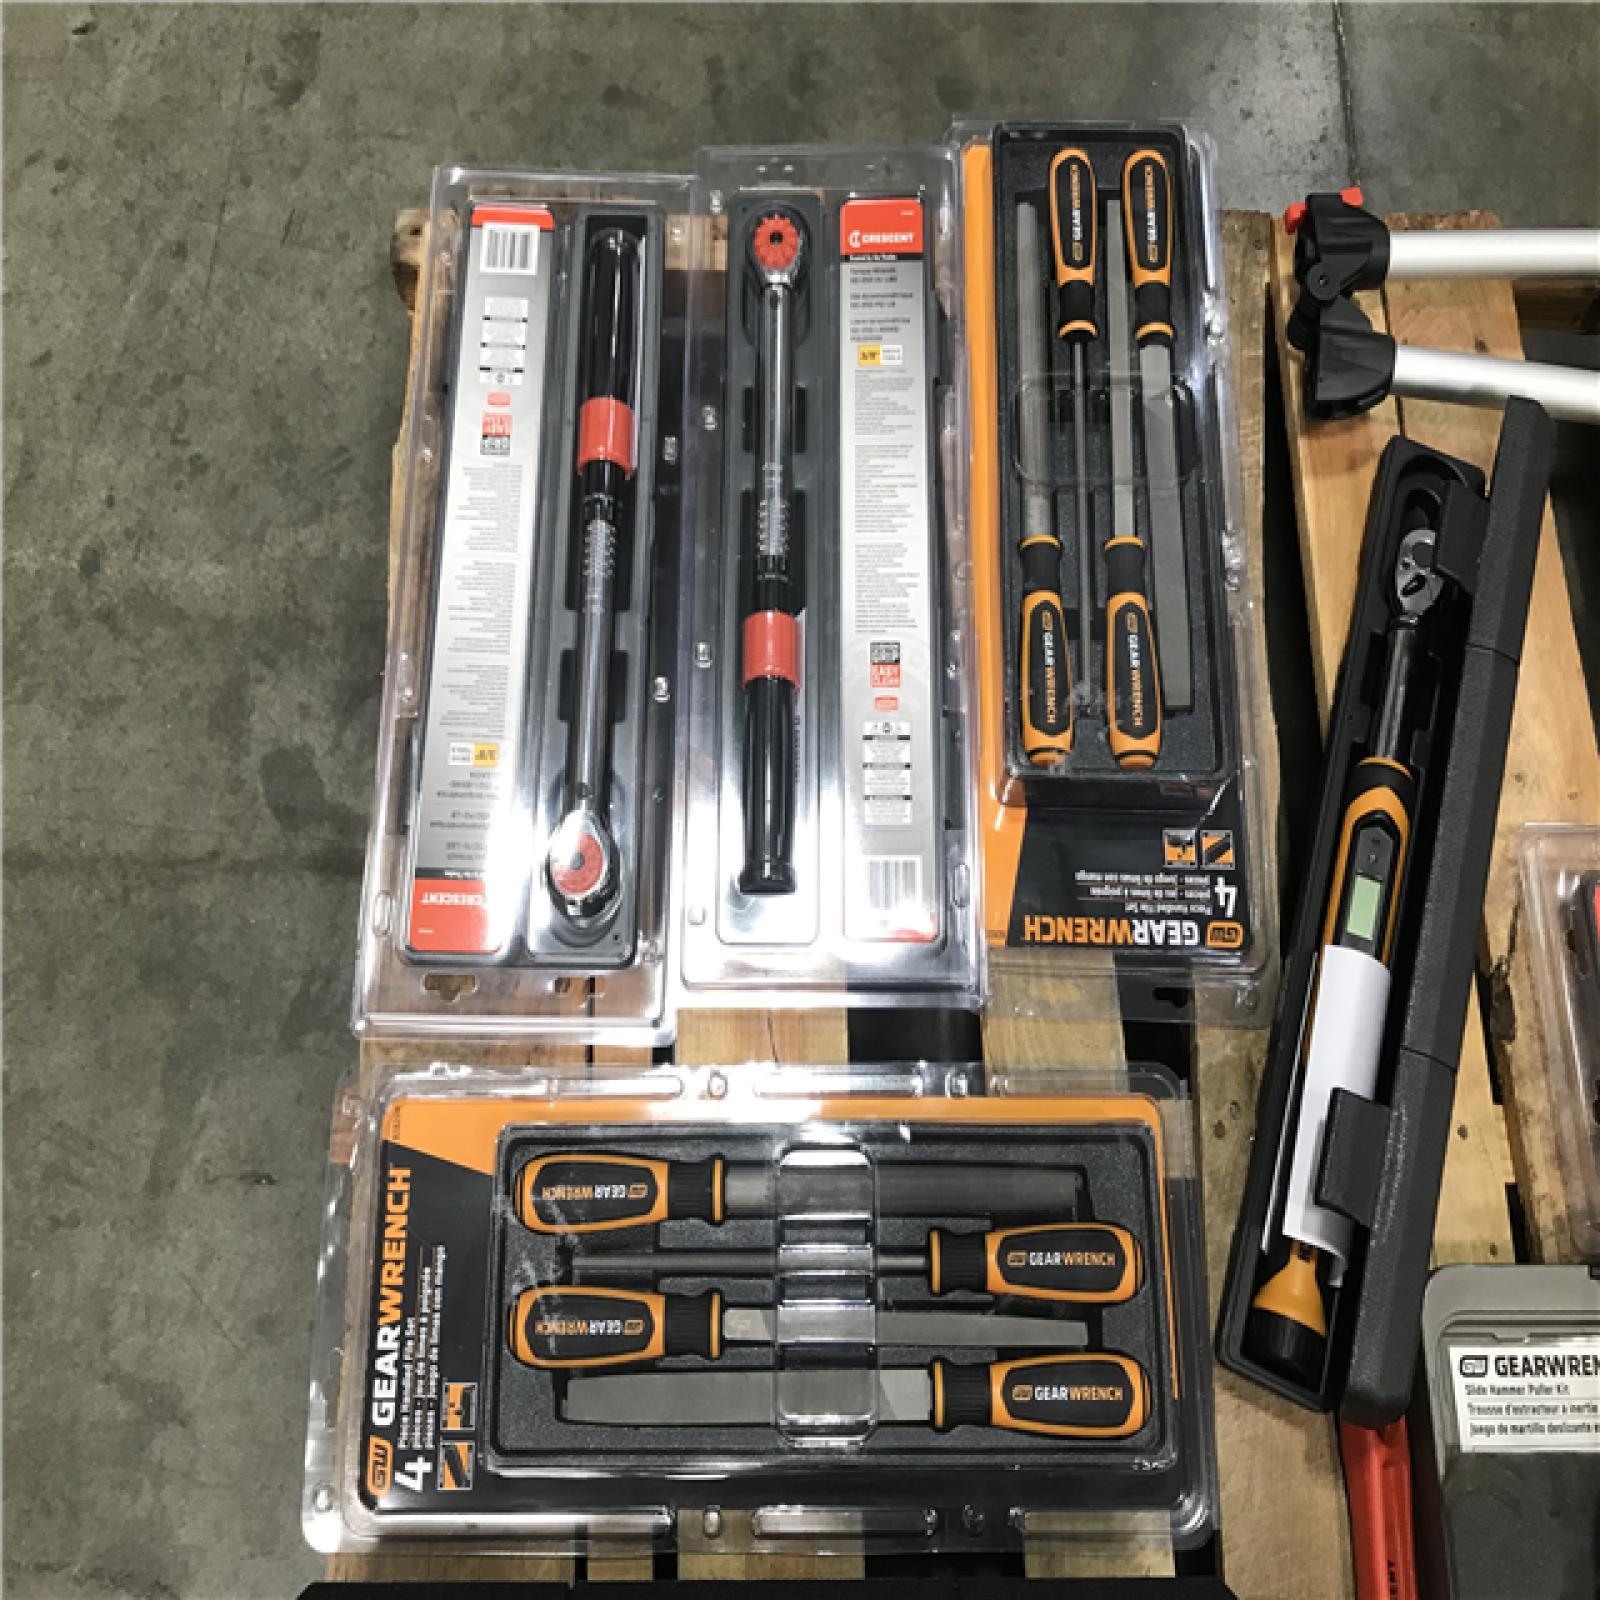 California NEW Gearwrench Miscellaneous